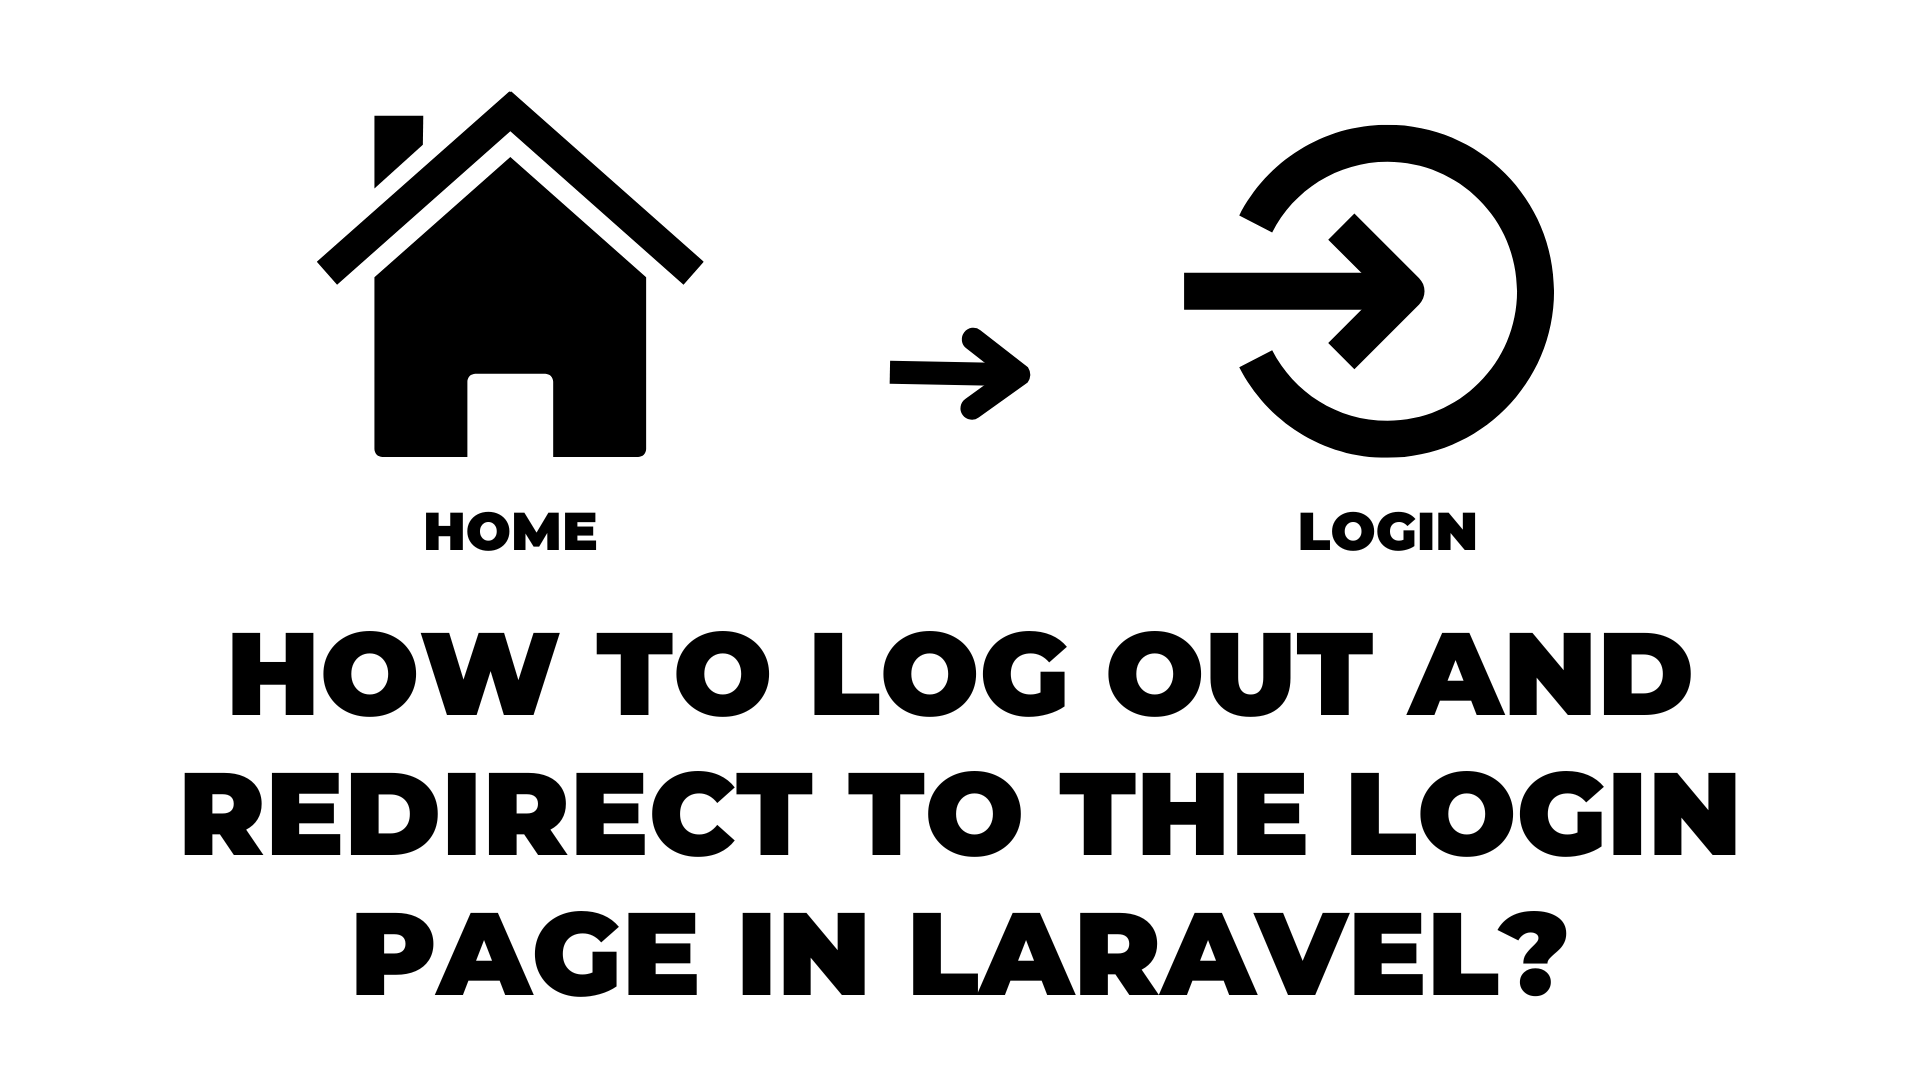 How to log out and redirect to the login page in Laravel?